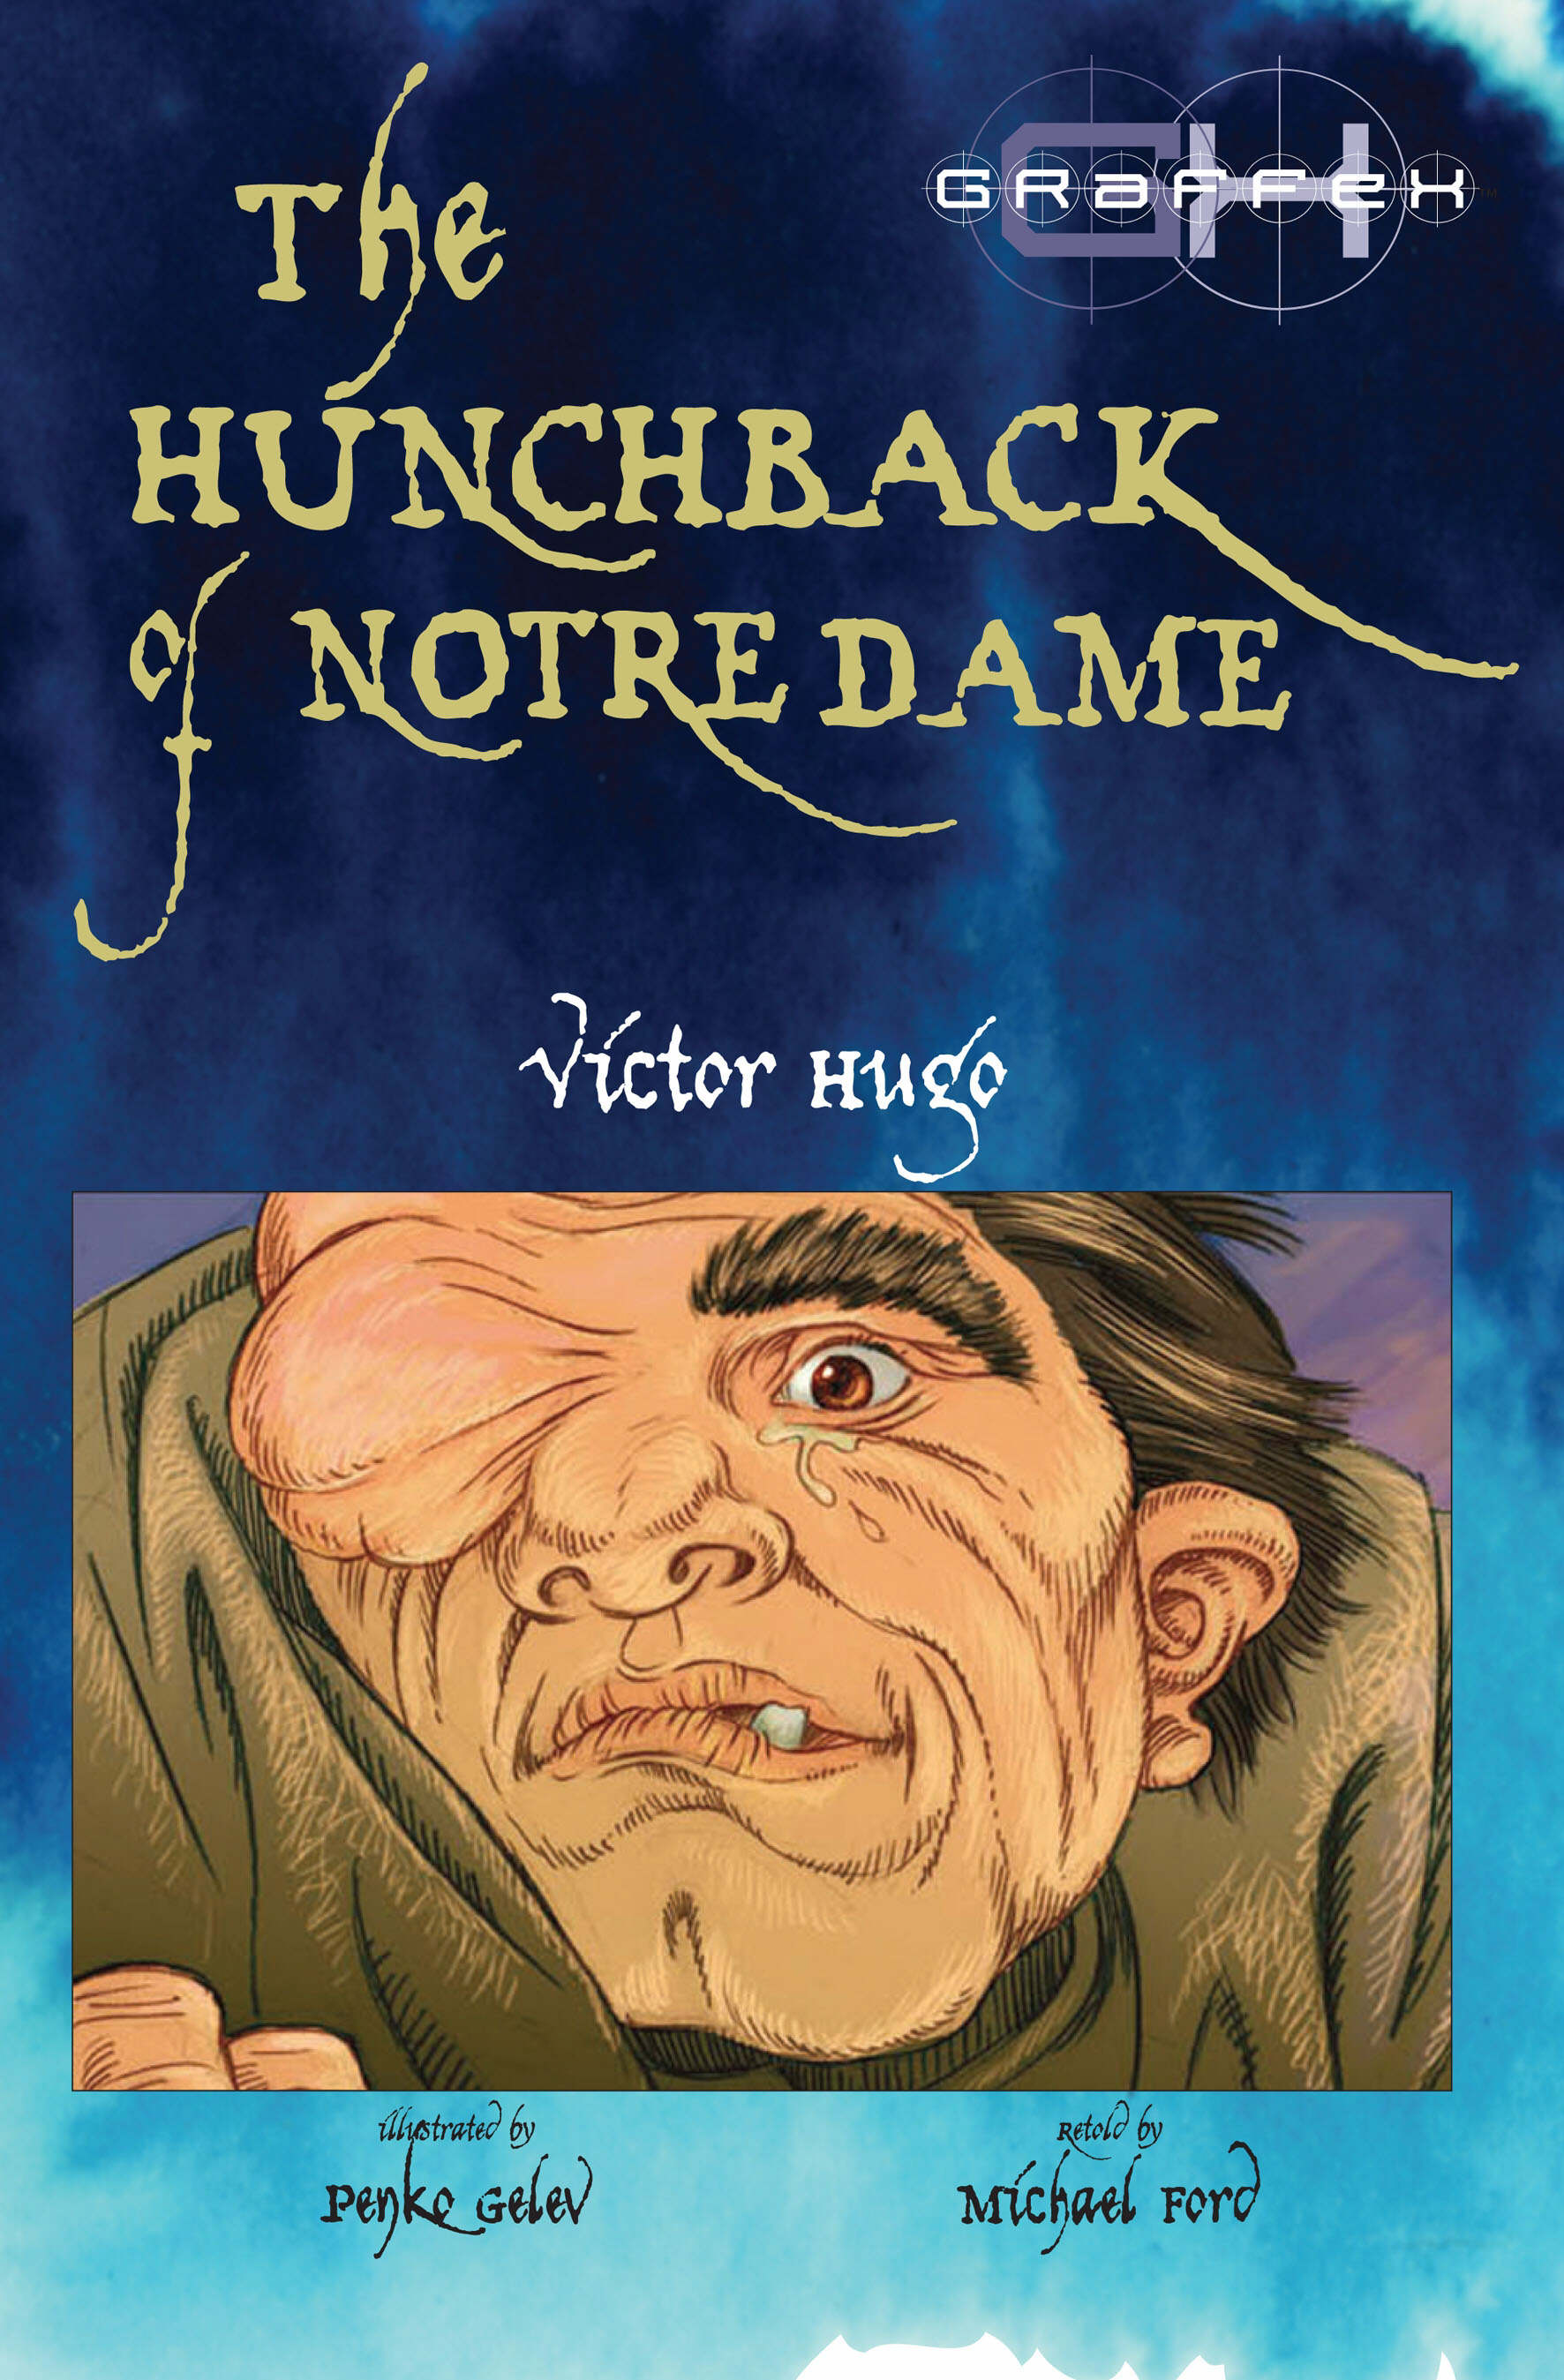 Victor Hugo's The hunchback of Notre Dame by Ford, Michael